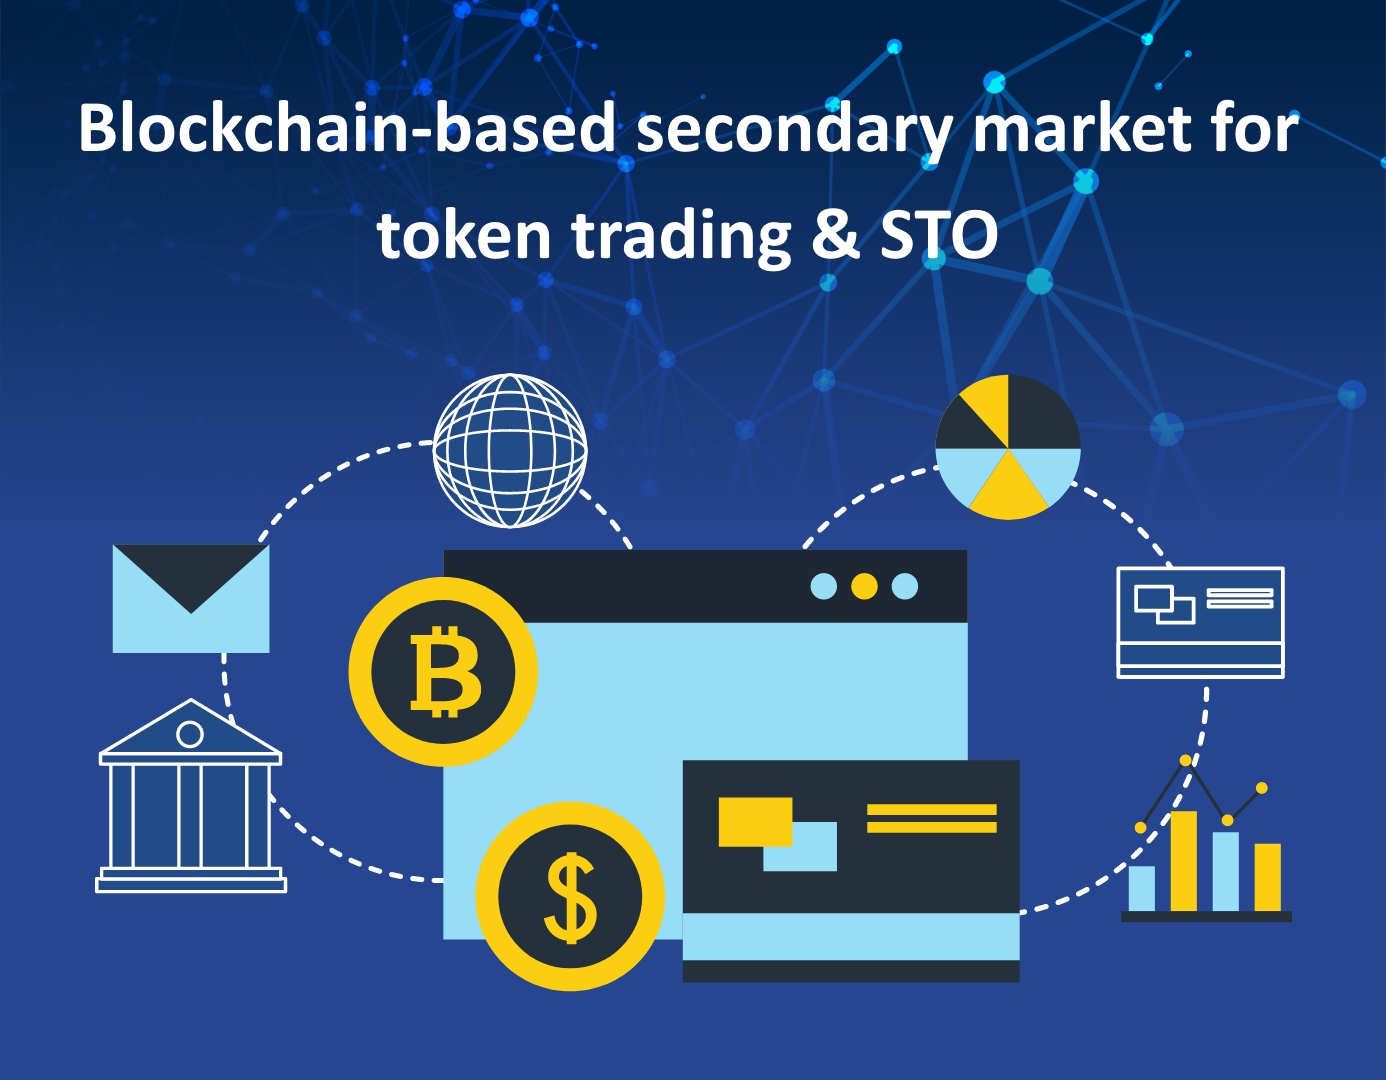 Blockchain-powered secondary market showcasing token trading and security token offering (STO), revolutionizing digital asset exchange and investment